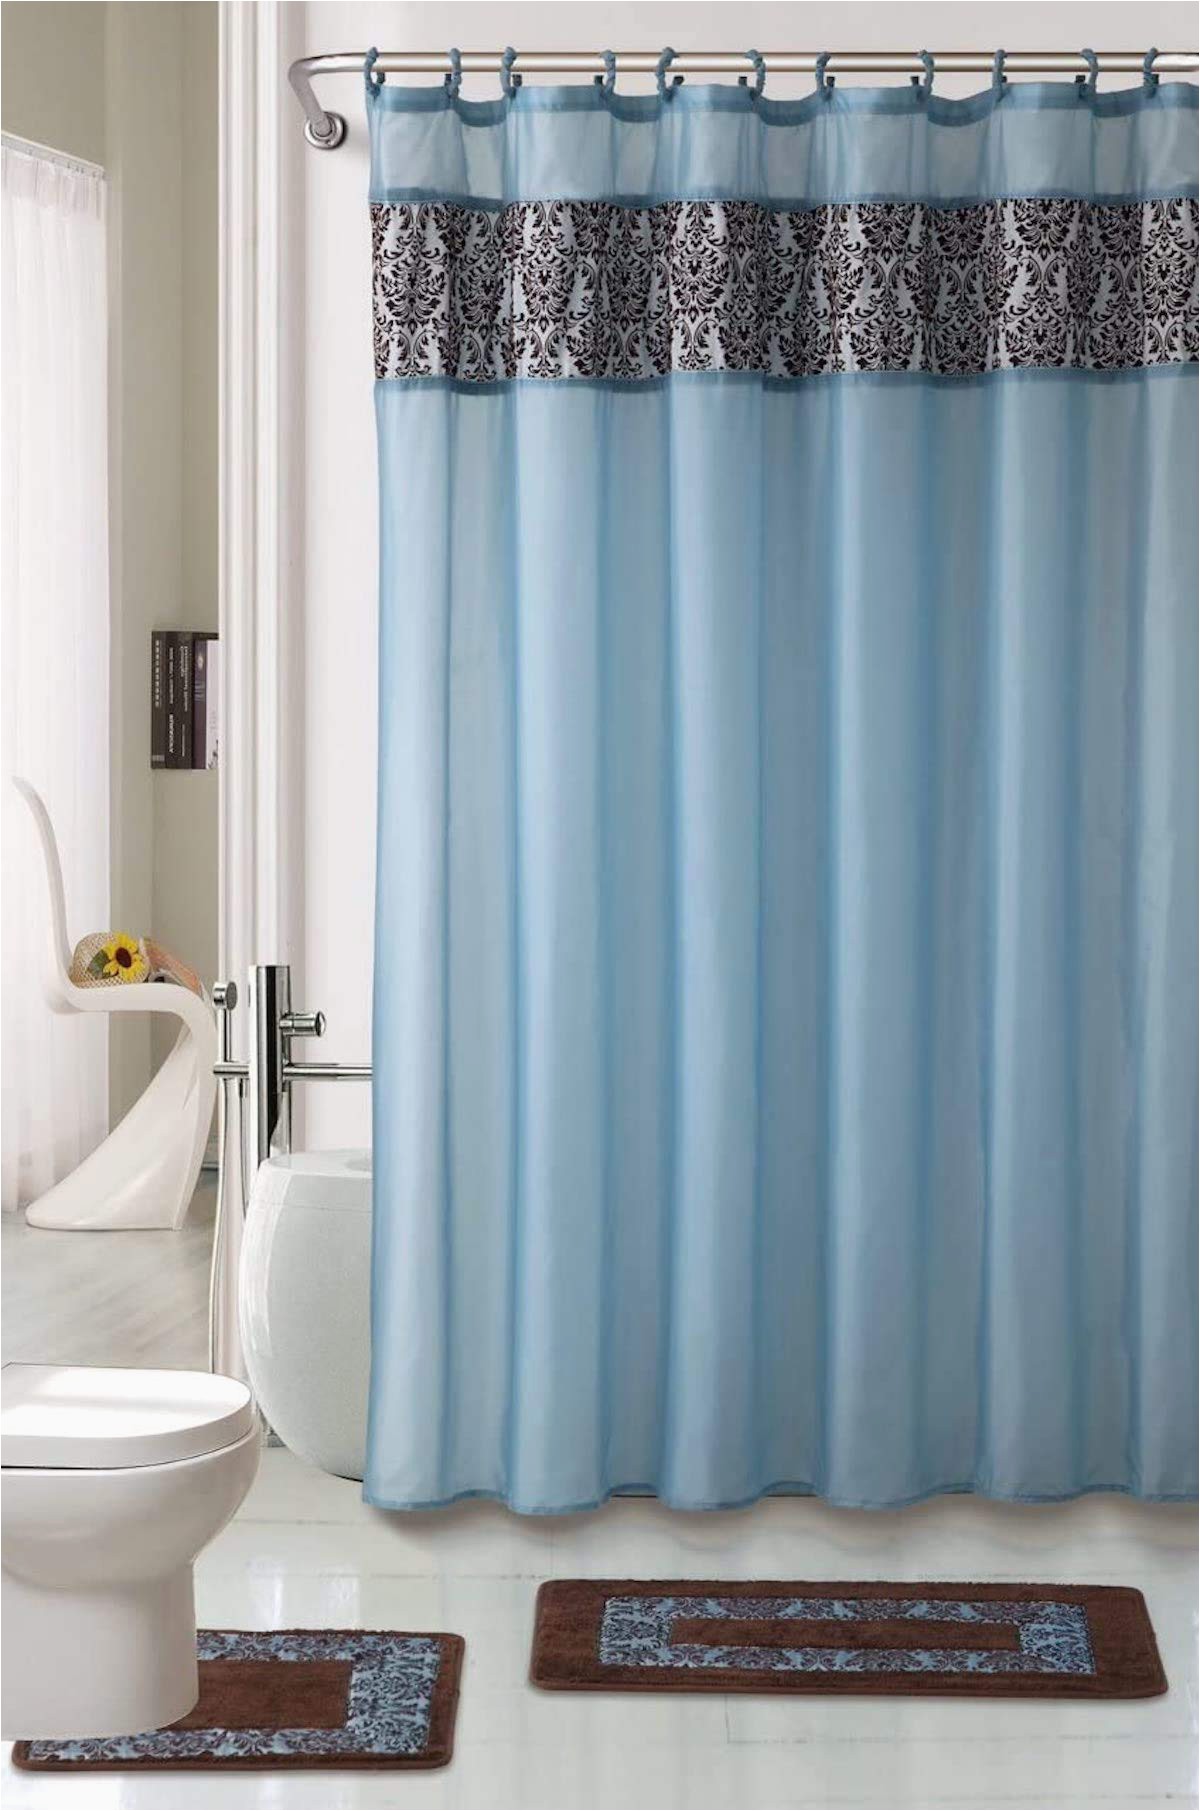 Aqua Blue Bathroom Rugs Wpm 4 Piece Luxury Majestic Flocking Blue Bath Rug Set 2 Piece Bathroom Rugs with Fabric Shower Curtain and Matching Rings